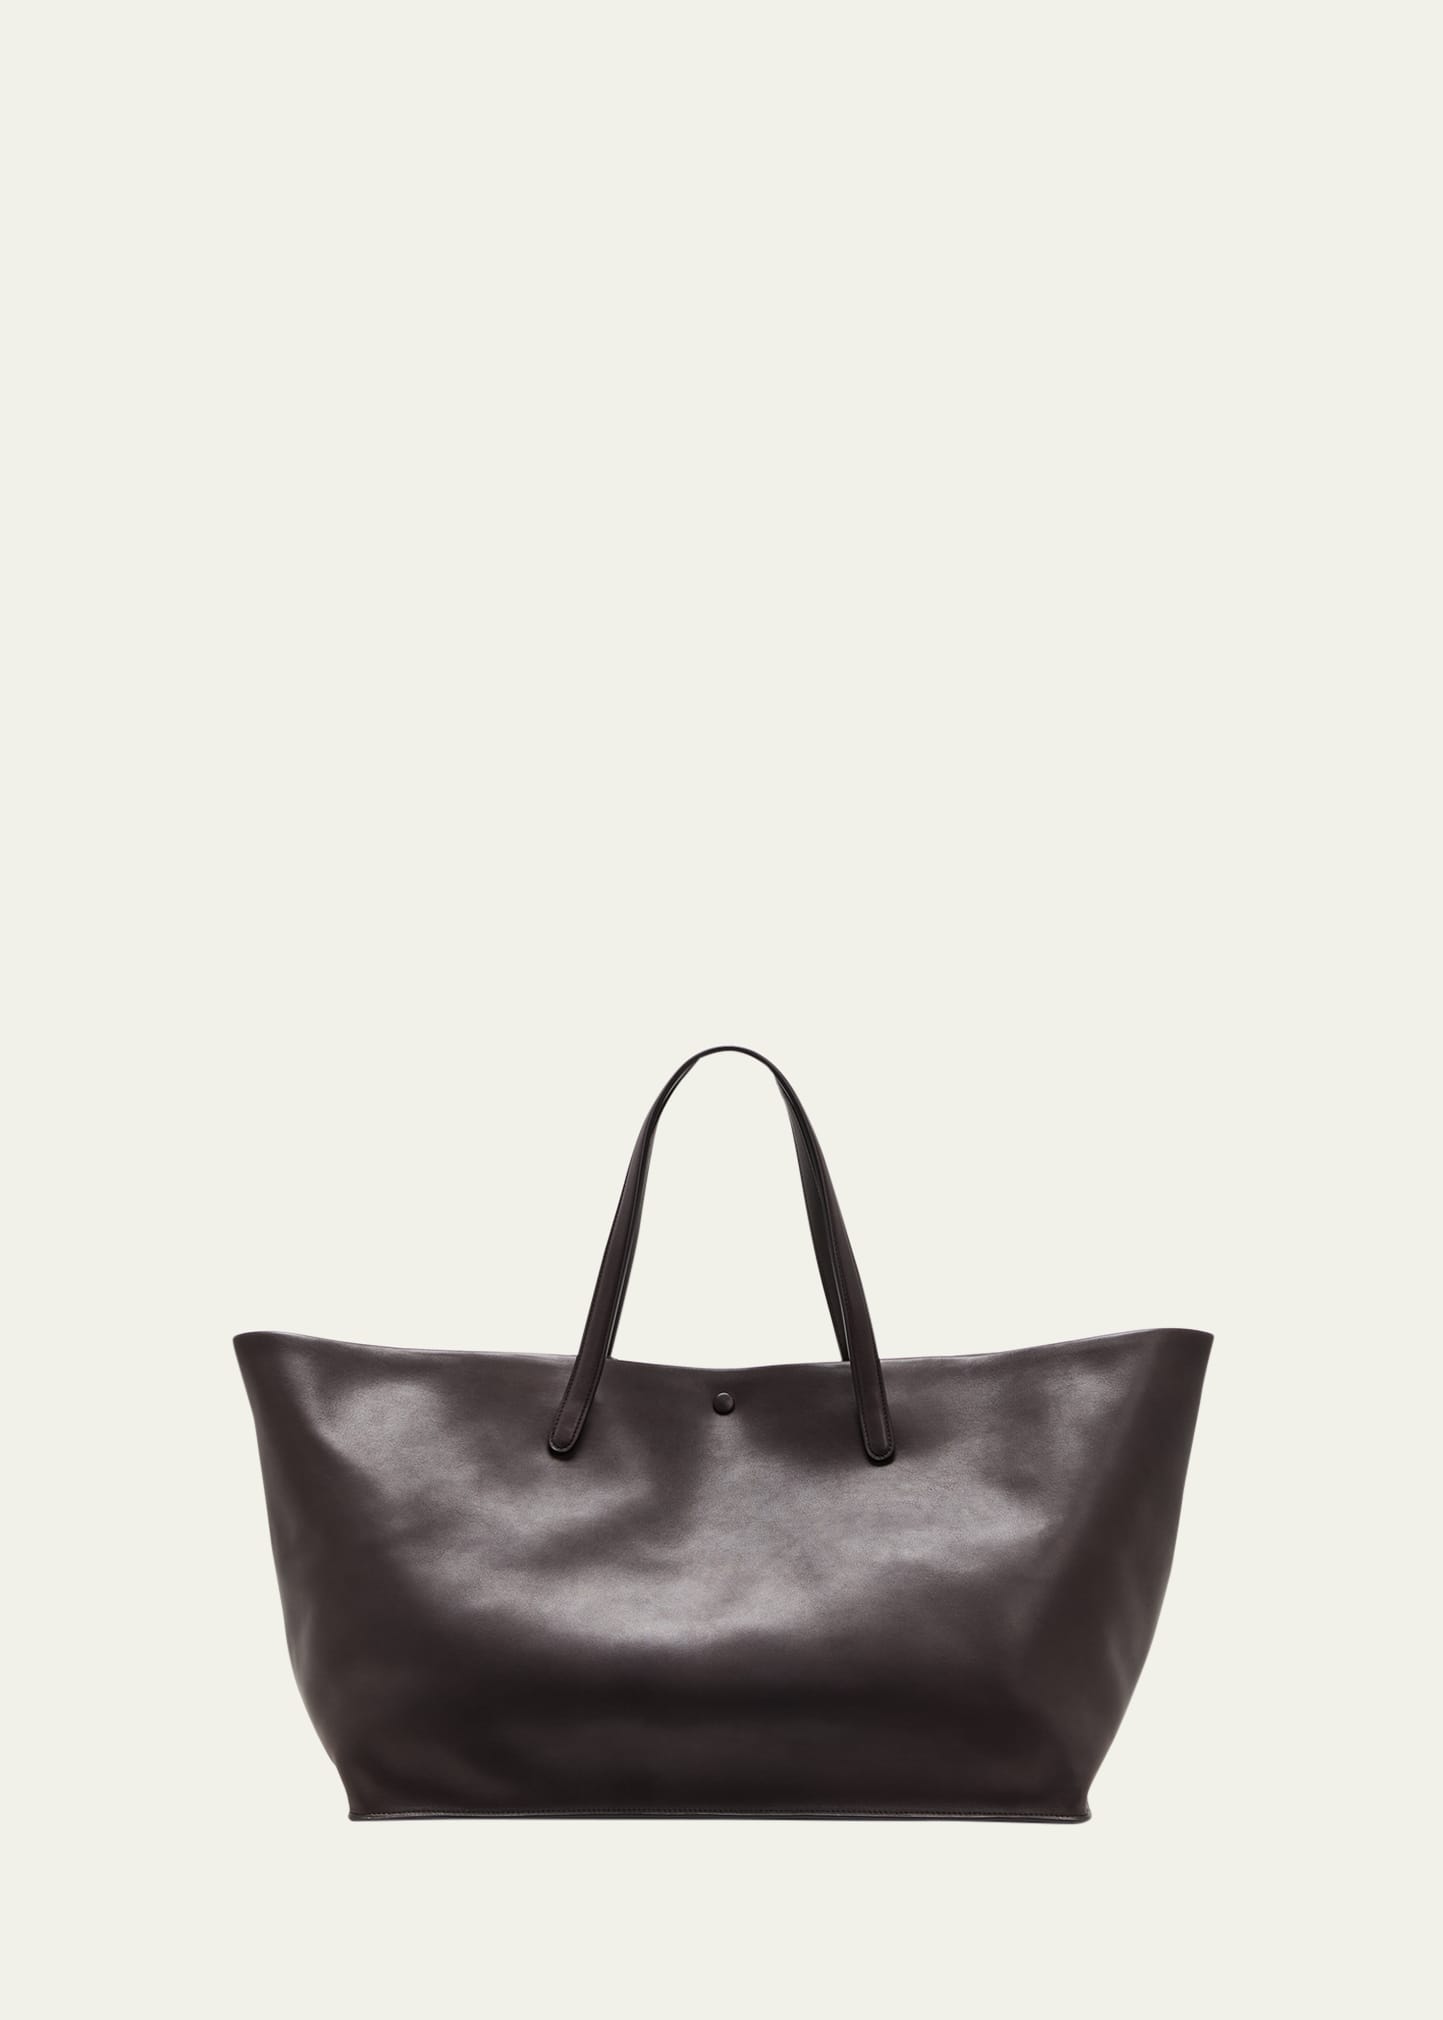 The Row Idaho Xl Tote Bag In Saddle Leather In Dbshg Dark Brown